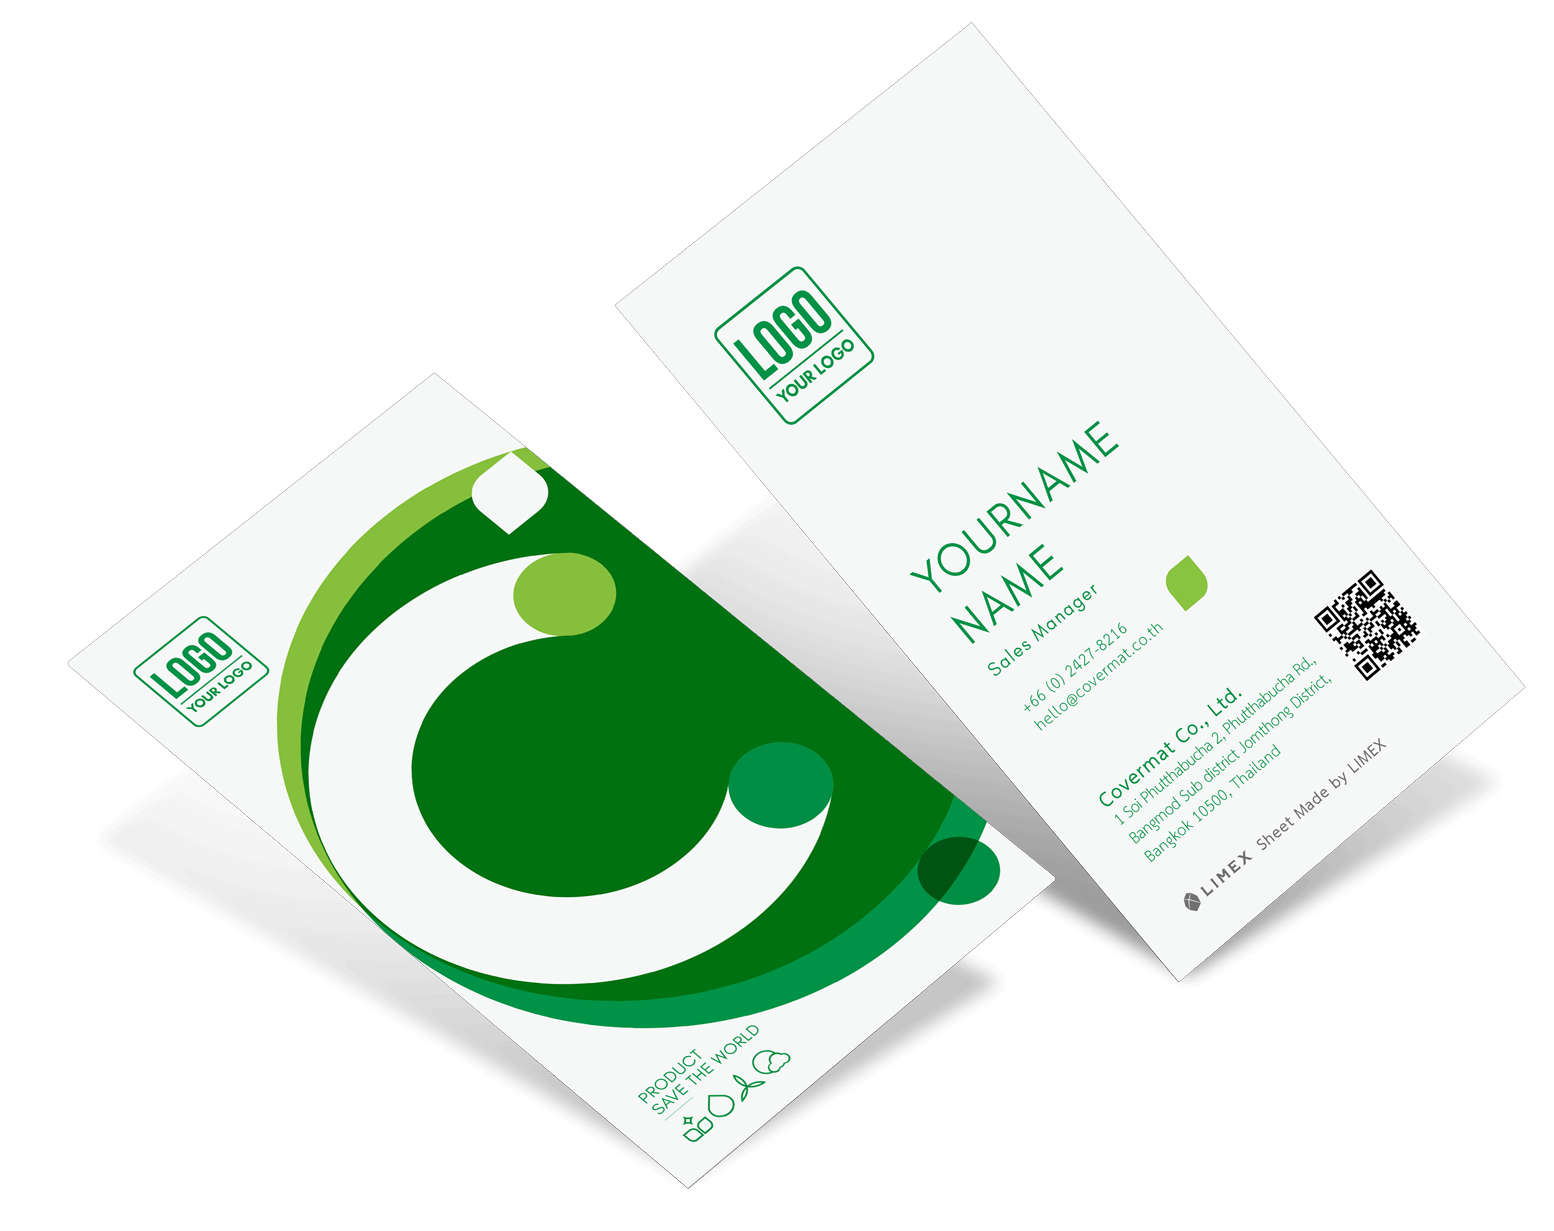 GREEN COVERMAT BUSINESS CARD 1